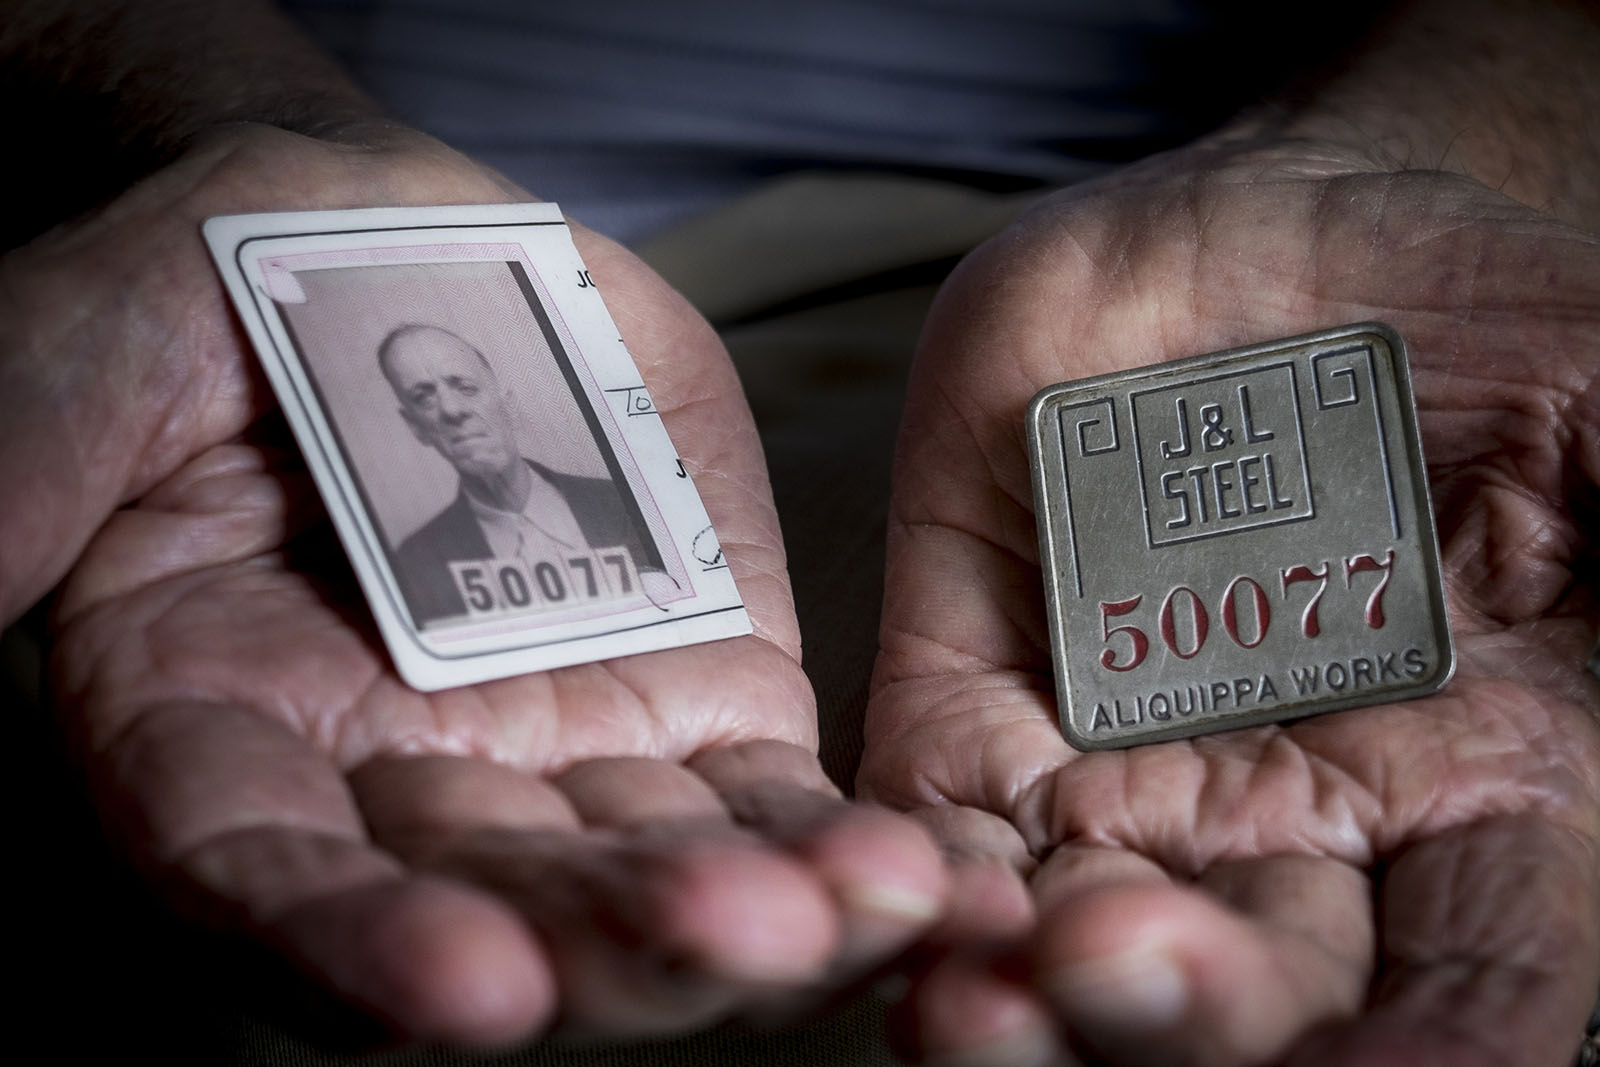 Hands holding a steel company badge and a cut-in-half ID.